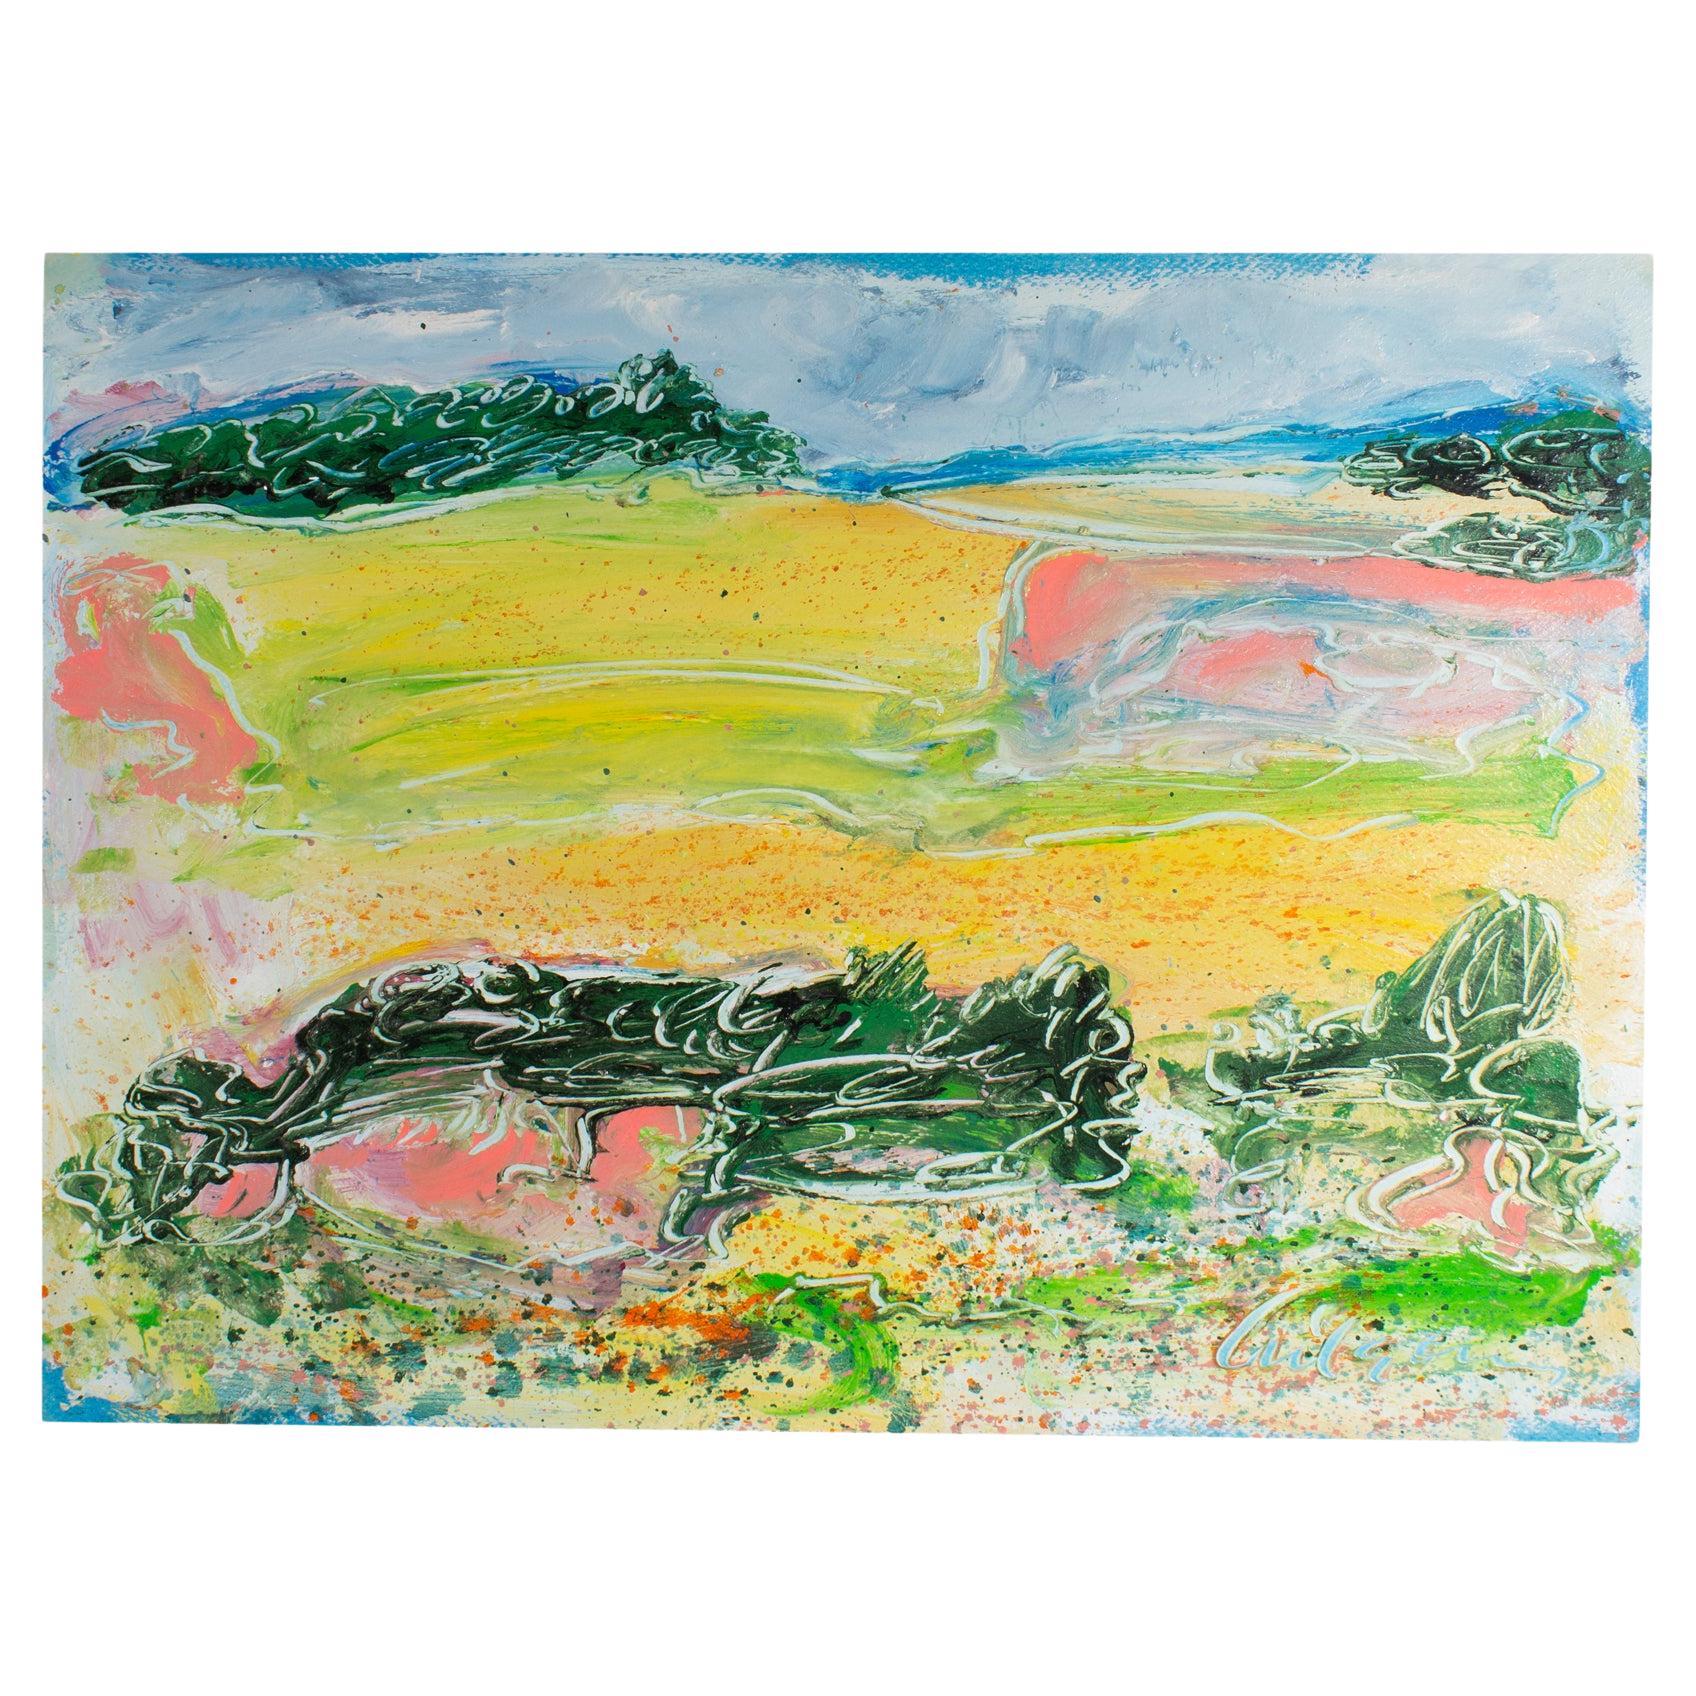 Harry Hilson Signed 1980s “Spring Landscape” Abstract Acrylic on Paper Painting For Sale